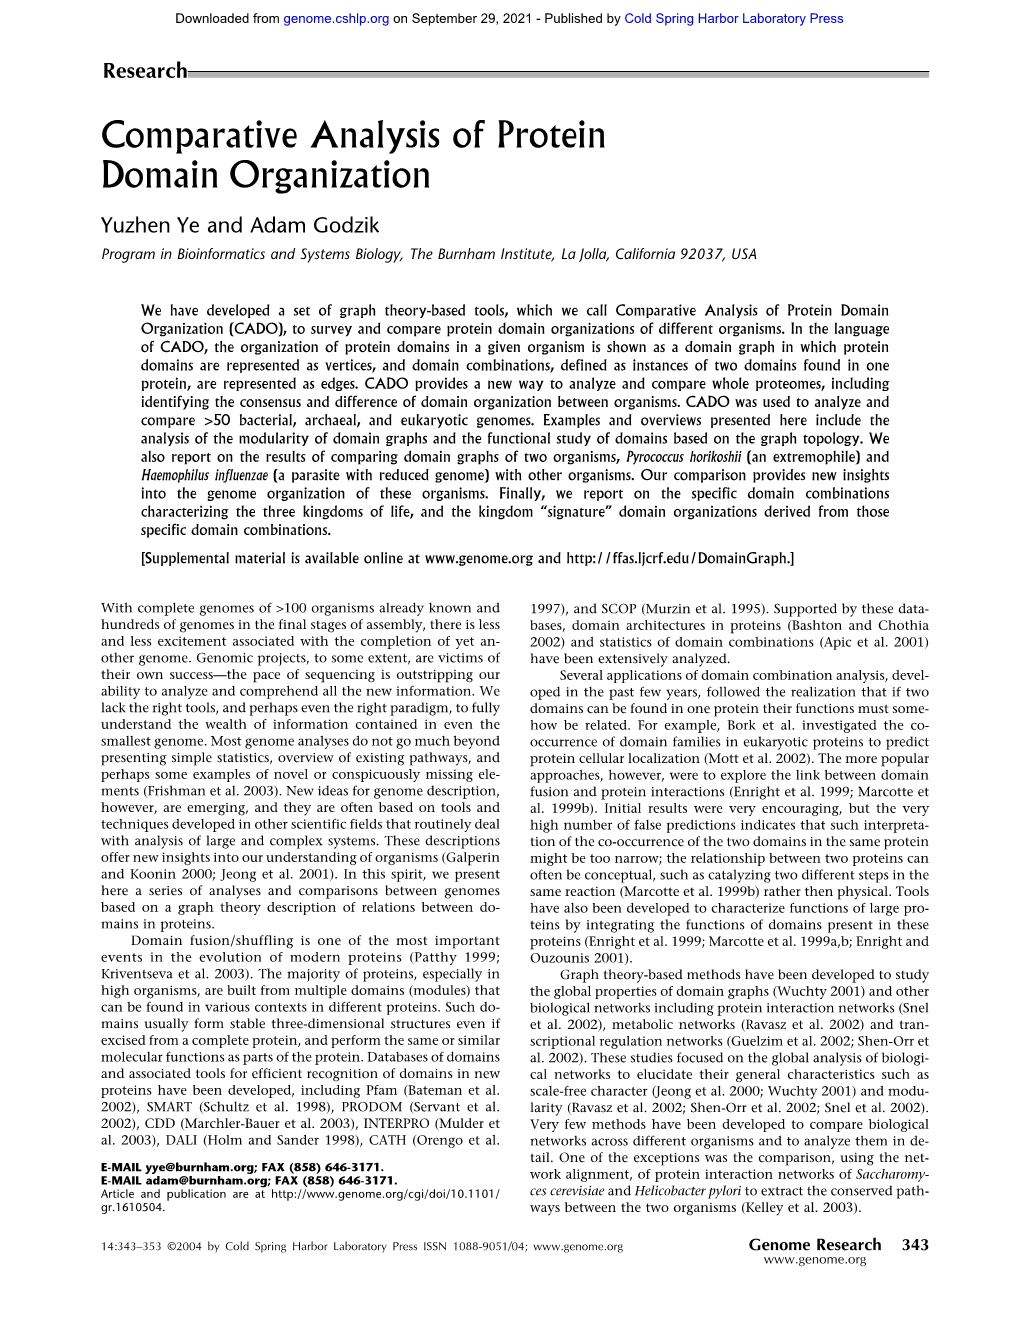 Comparative Analysis of Protein Domain Organization